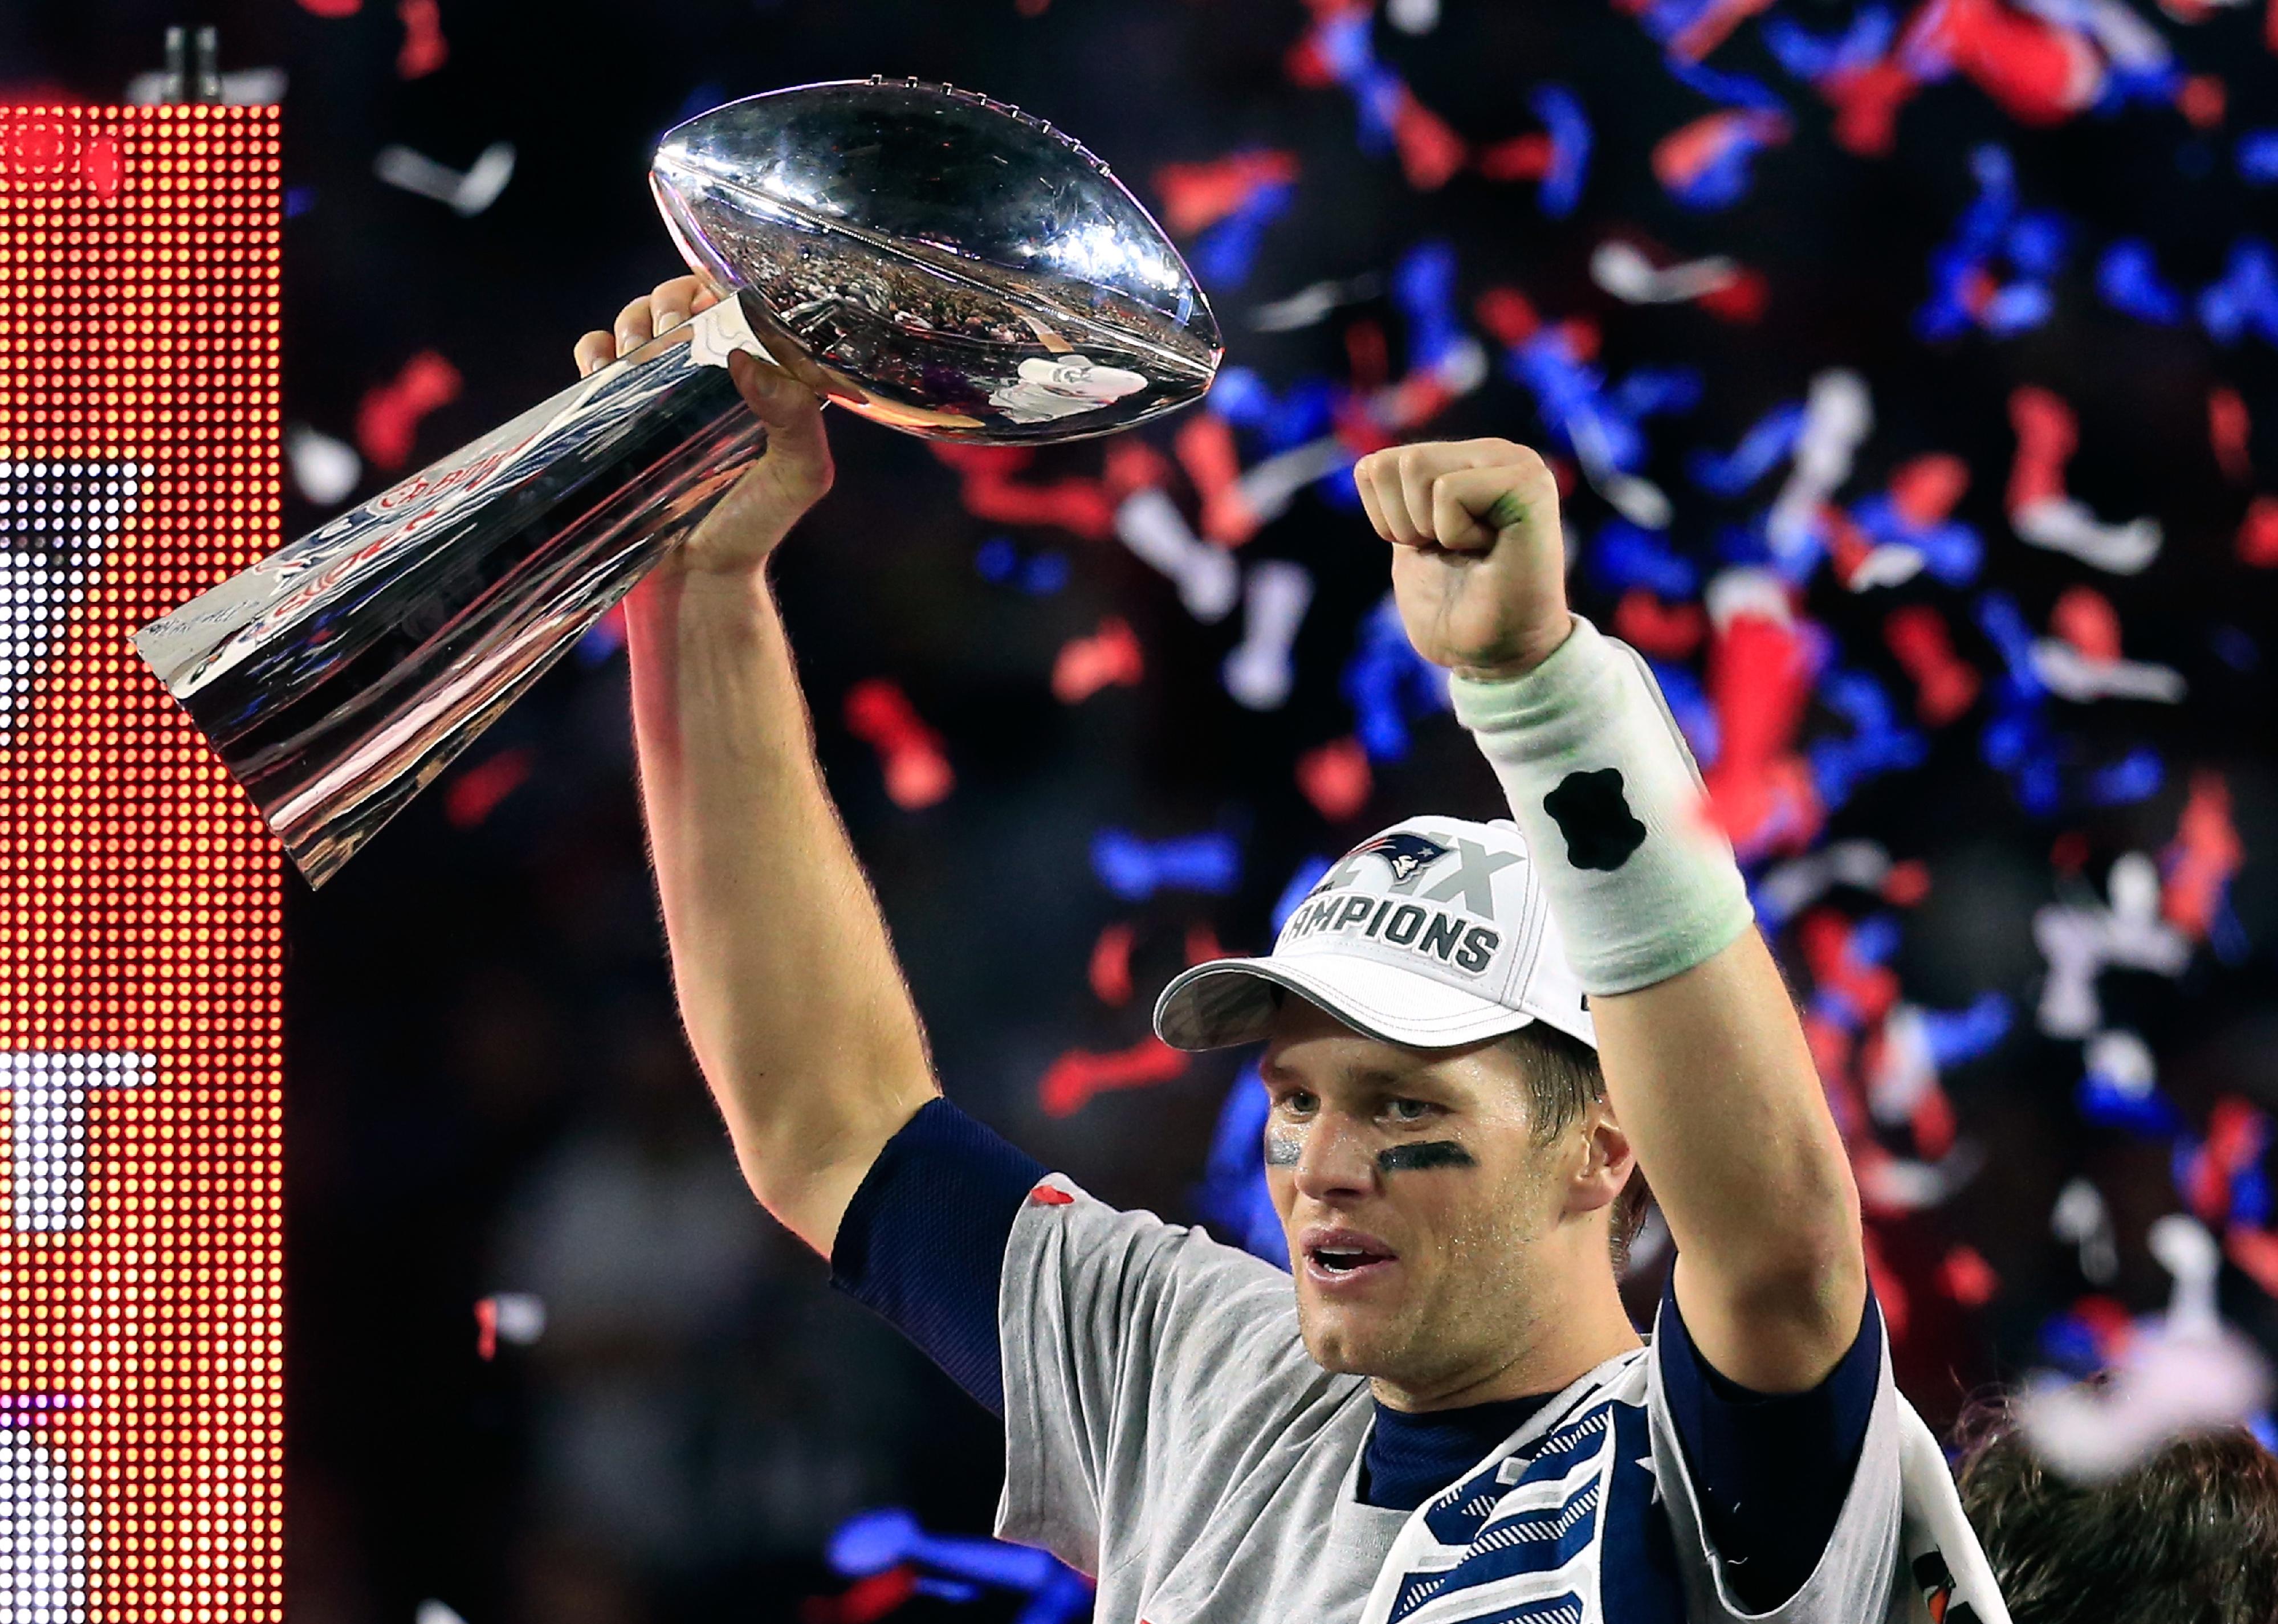 Tom Brady of the New England Patriots celebrates with the Vince Lombardi Trophy.